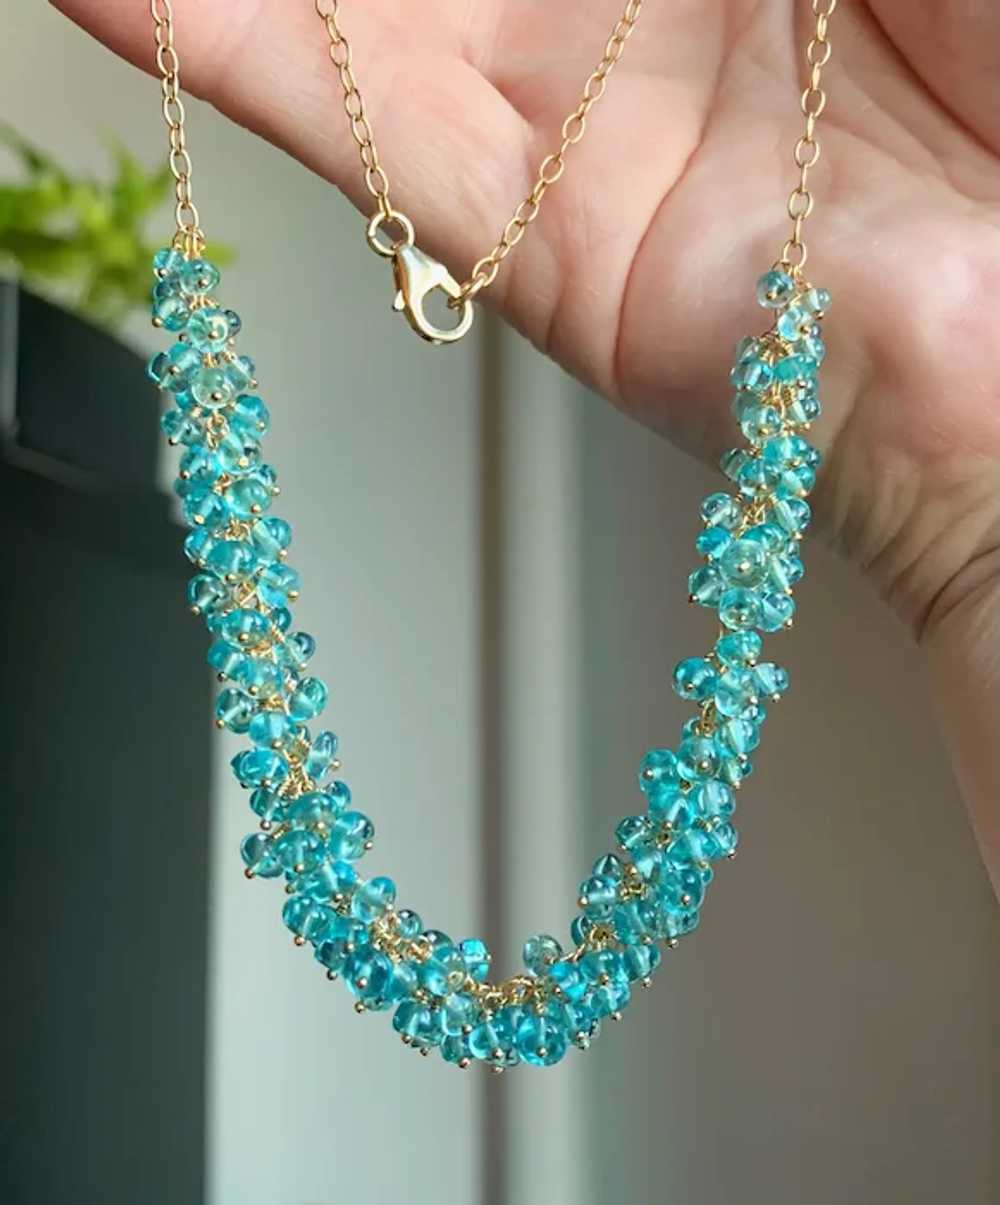 Neon Blue Apatite Gemstone Cluster Necklace | One… - image 4